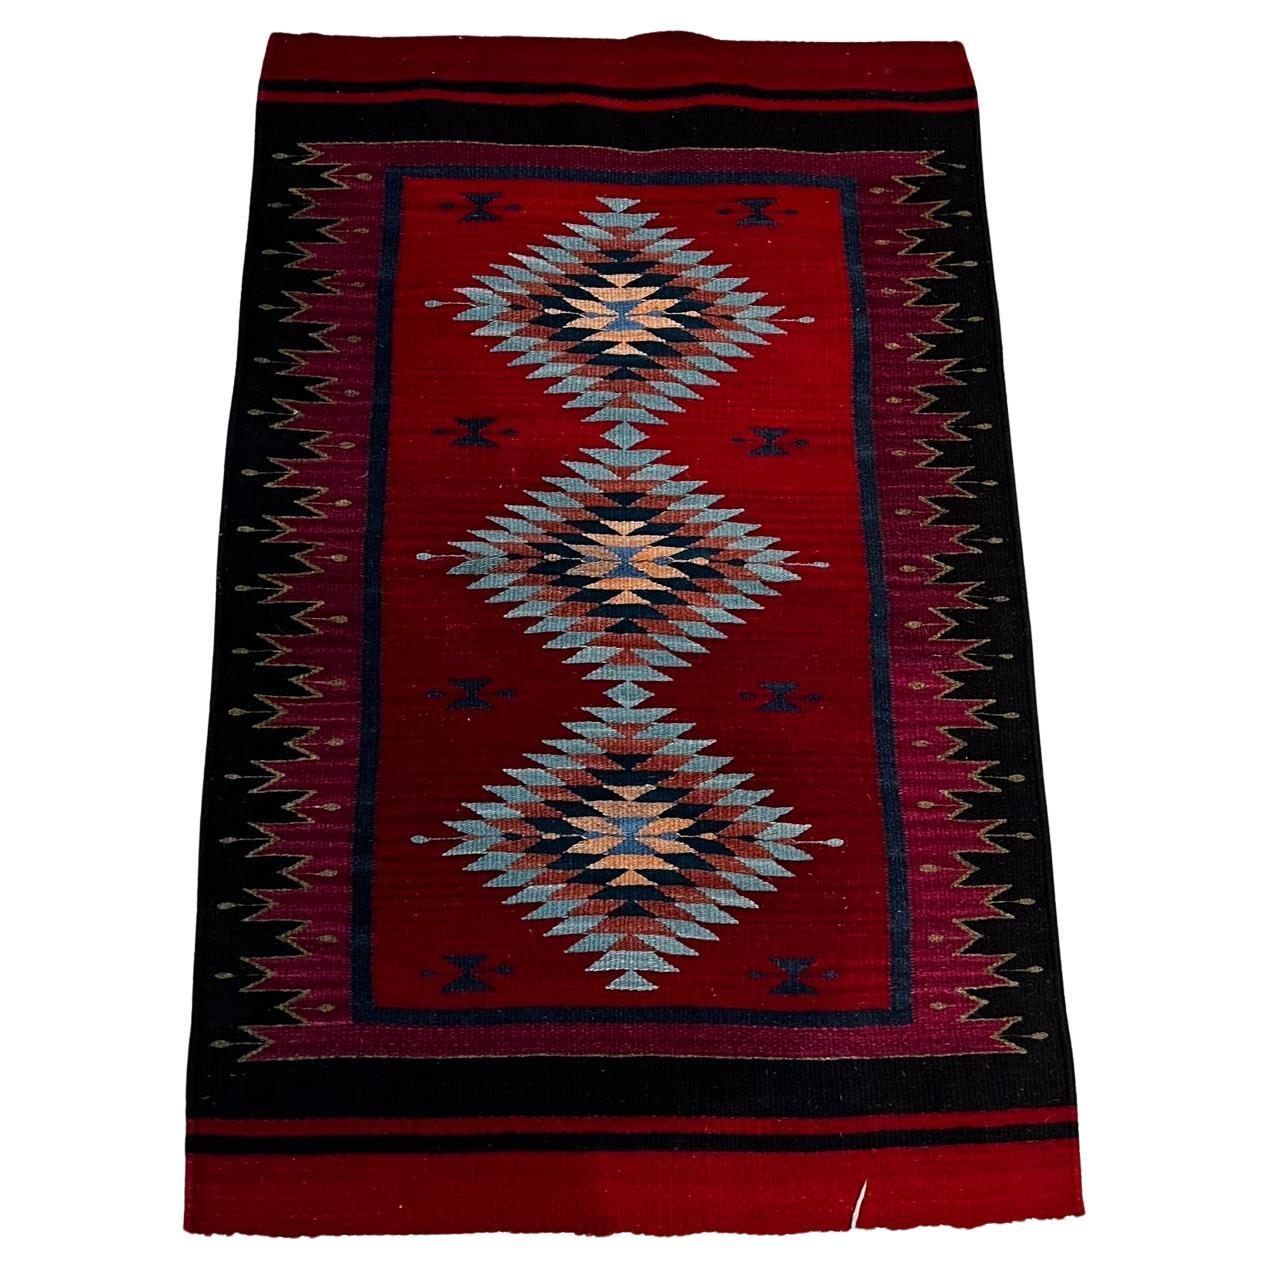 Style of Native Navajo Wall Art Tapestry Rug
Vibrant colors red, black pink.
25.25 w x 39.25 tall
Preowned vintage unrestored condition.
Review images please.
